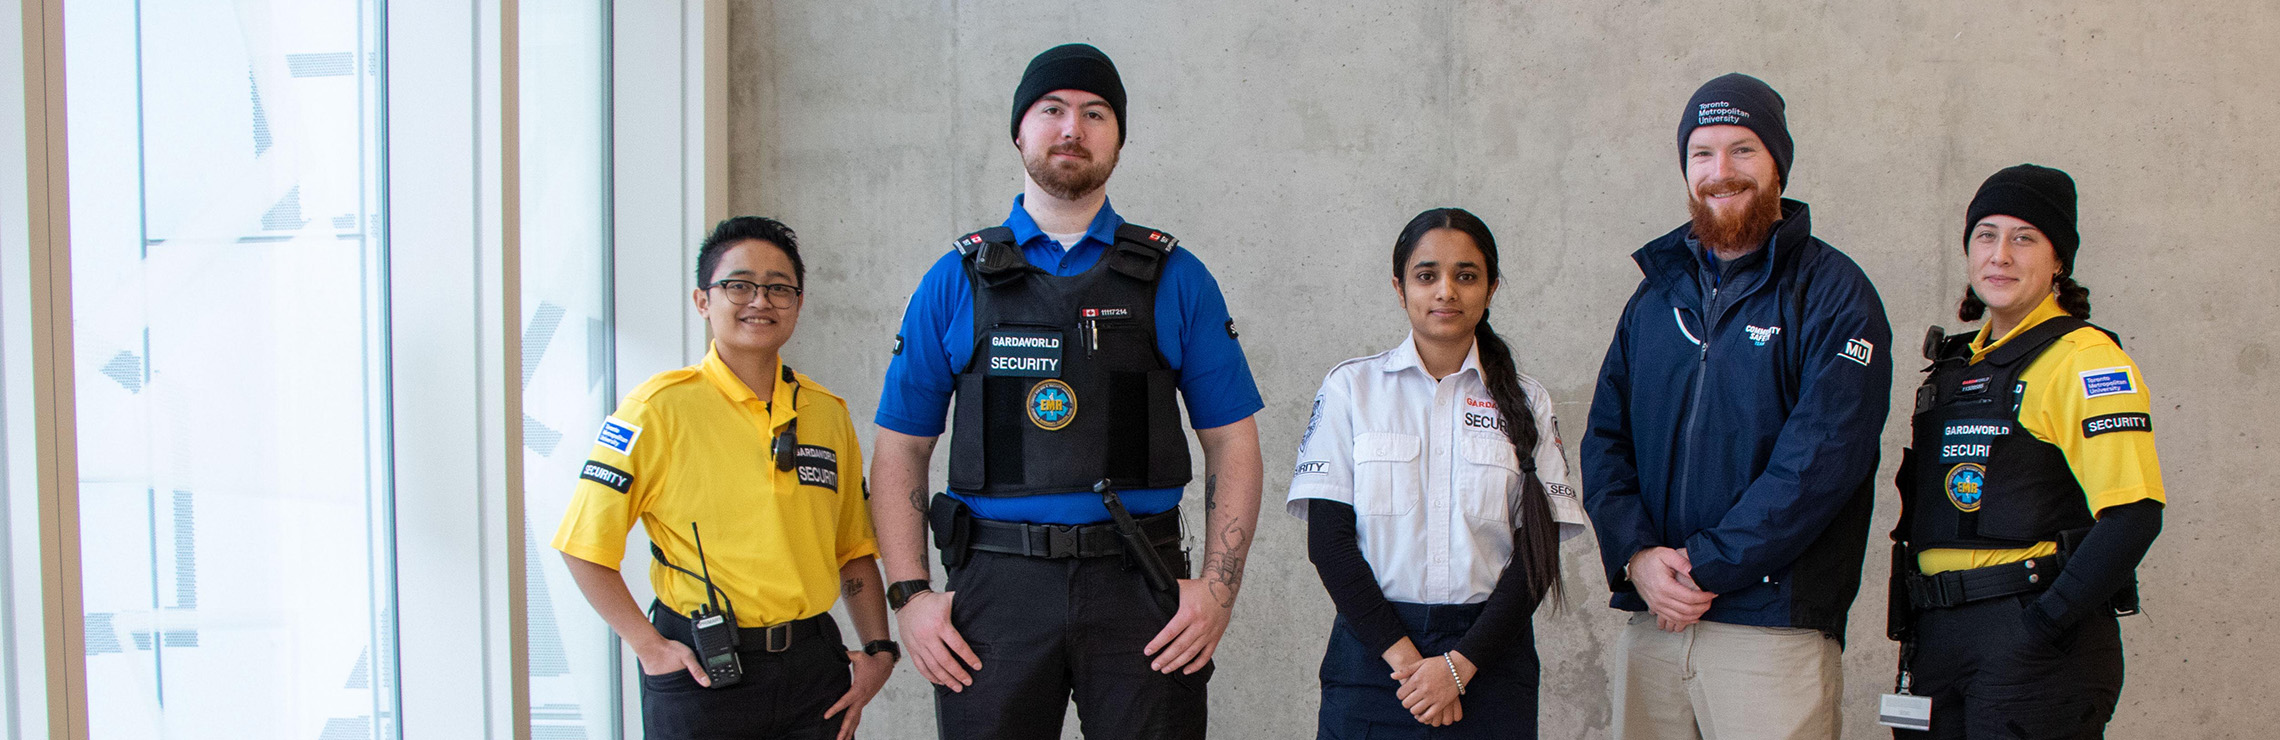 Five members of the Community Safety and Security team wearing the new uniforms and attire in front of a cement wall.